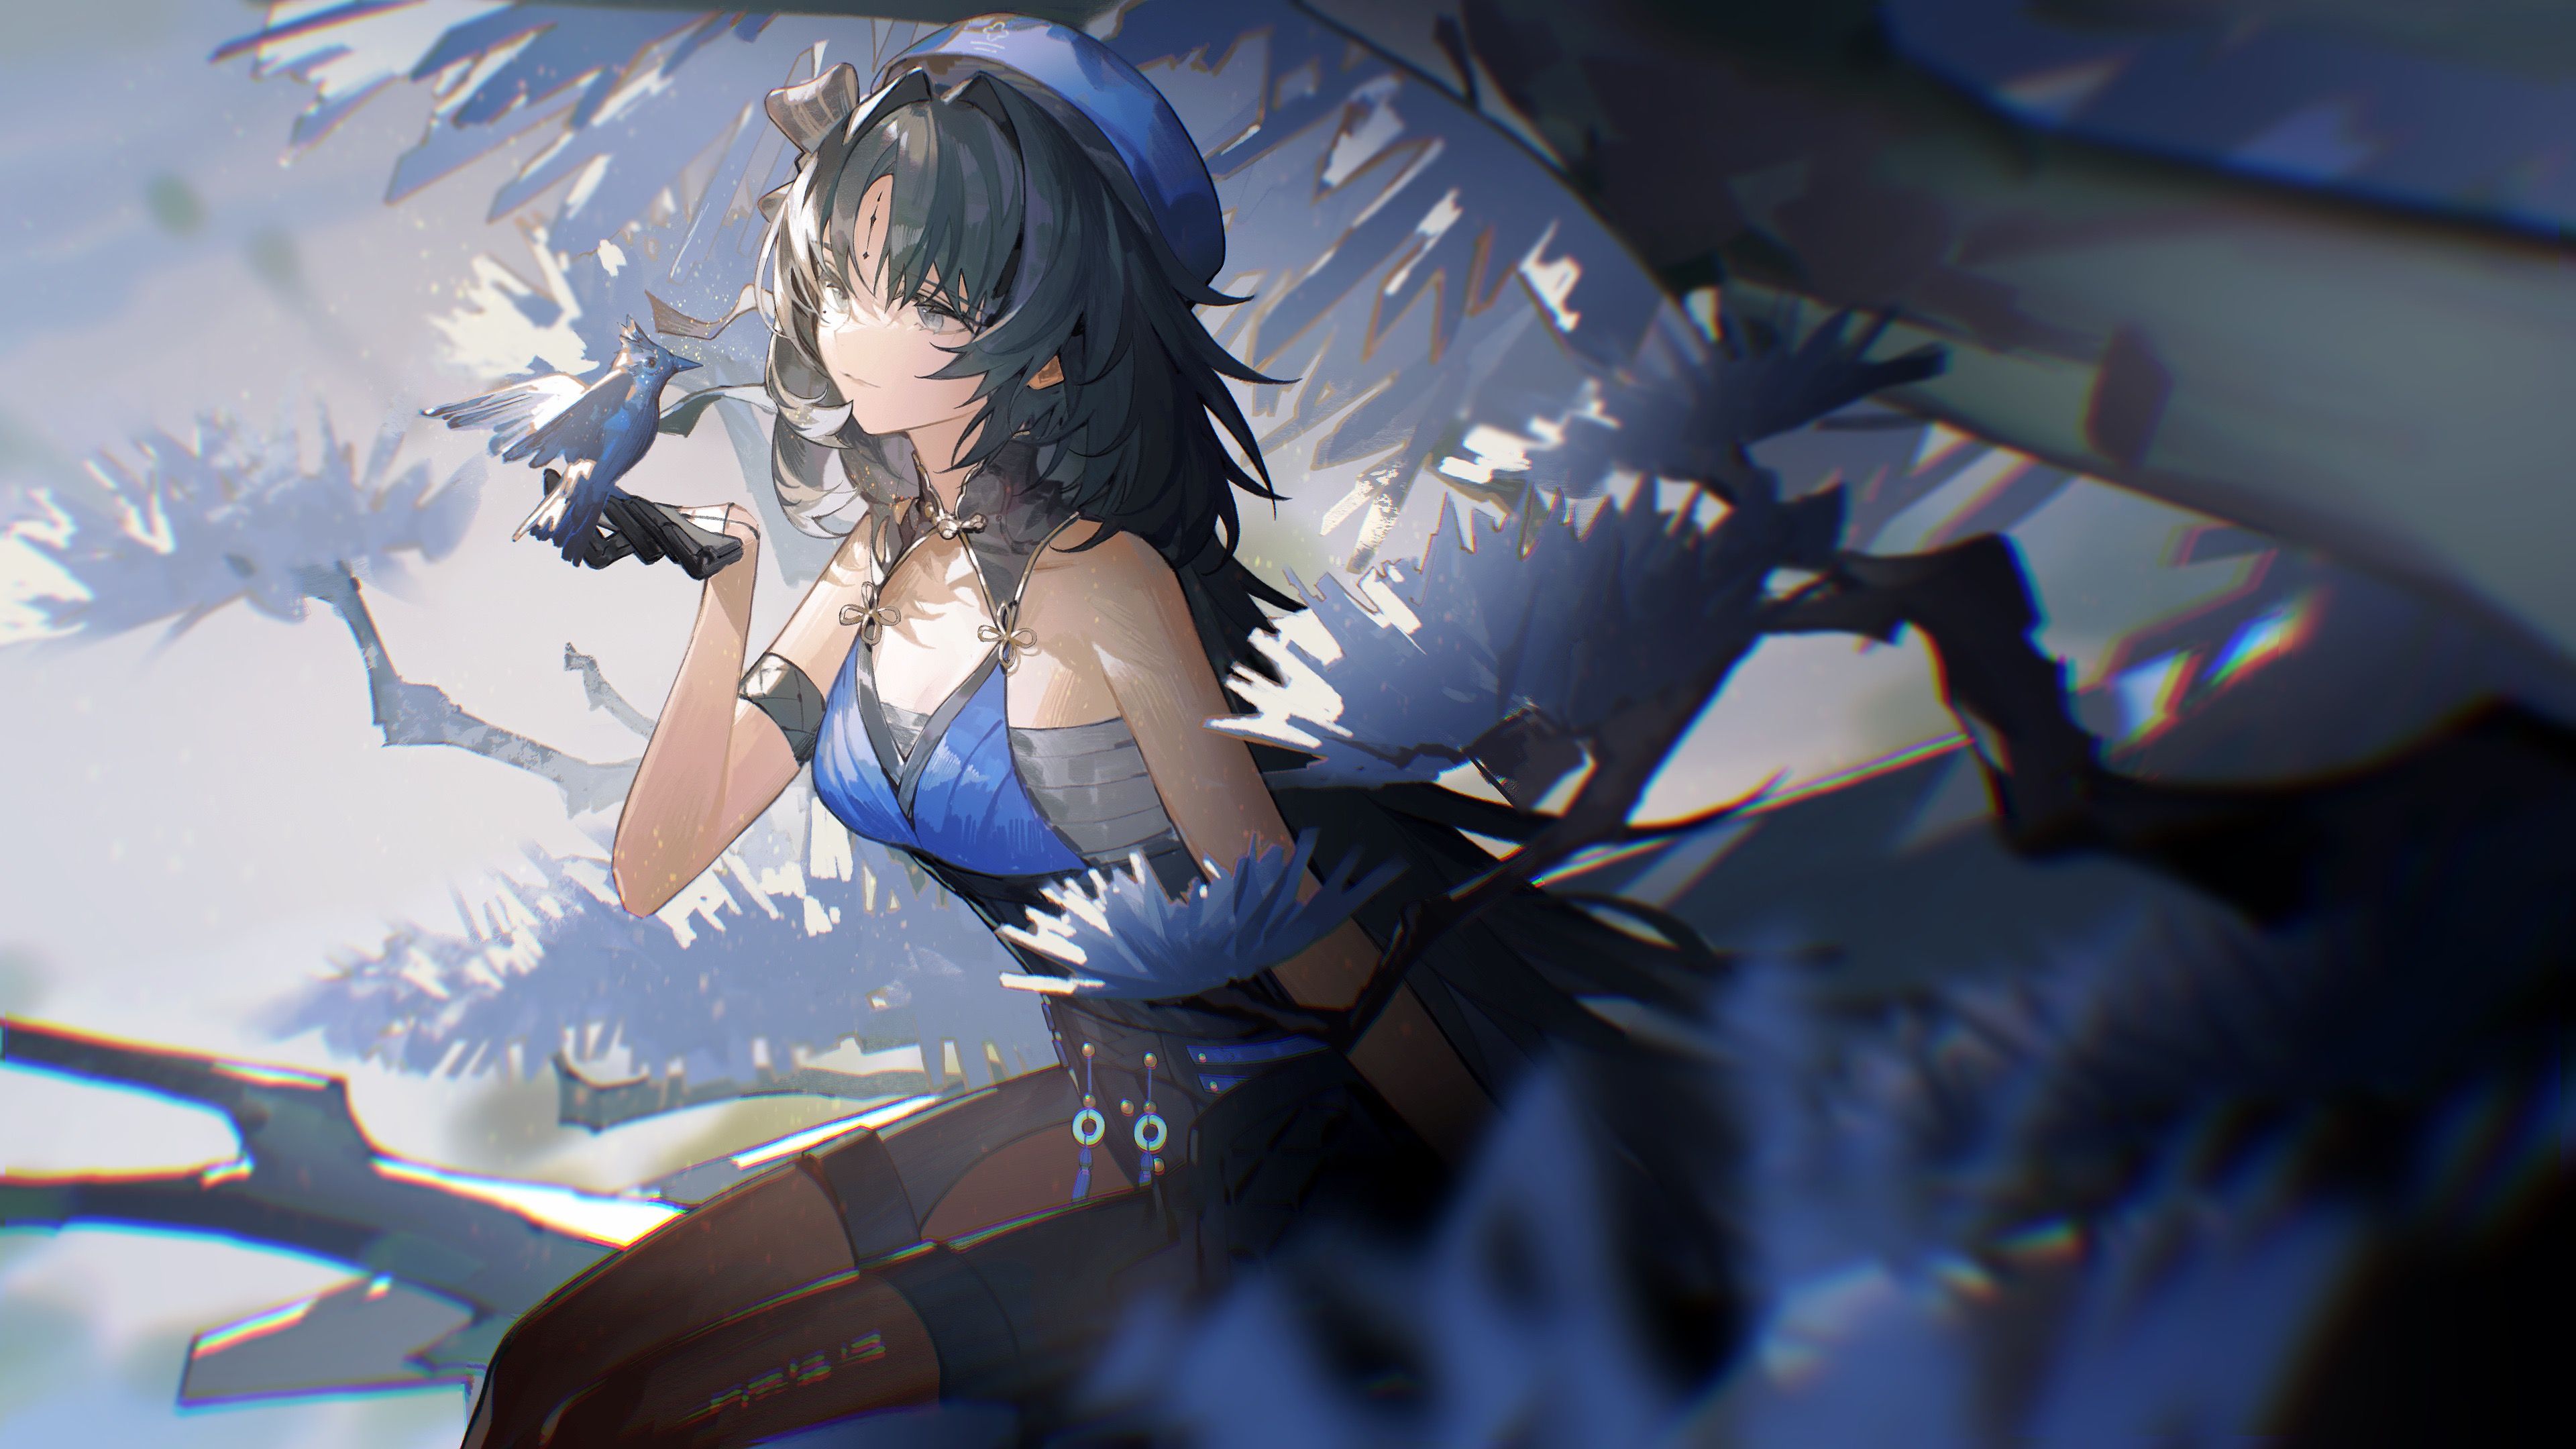 Wuthering Waves Yangyang Wuthering Waves Video Game Art Anime Games Anime Girls Chinese Clothing 3840x2160